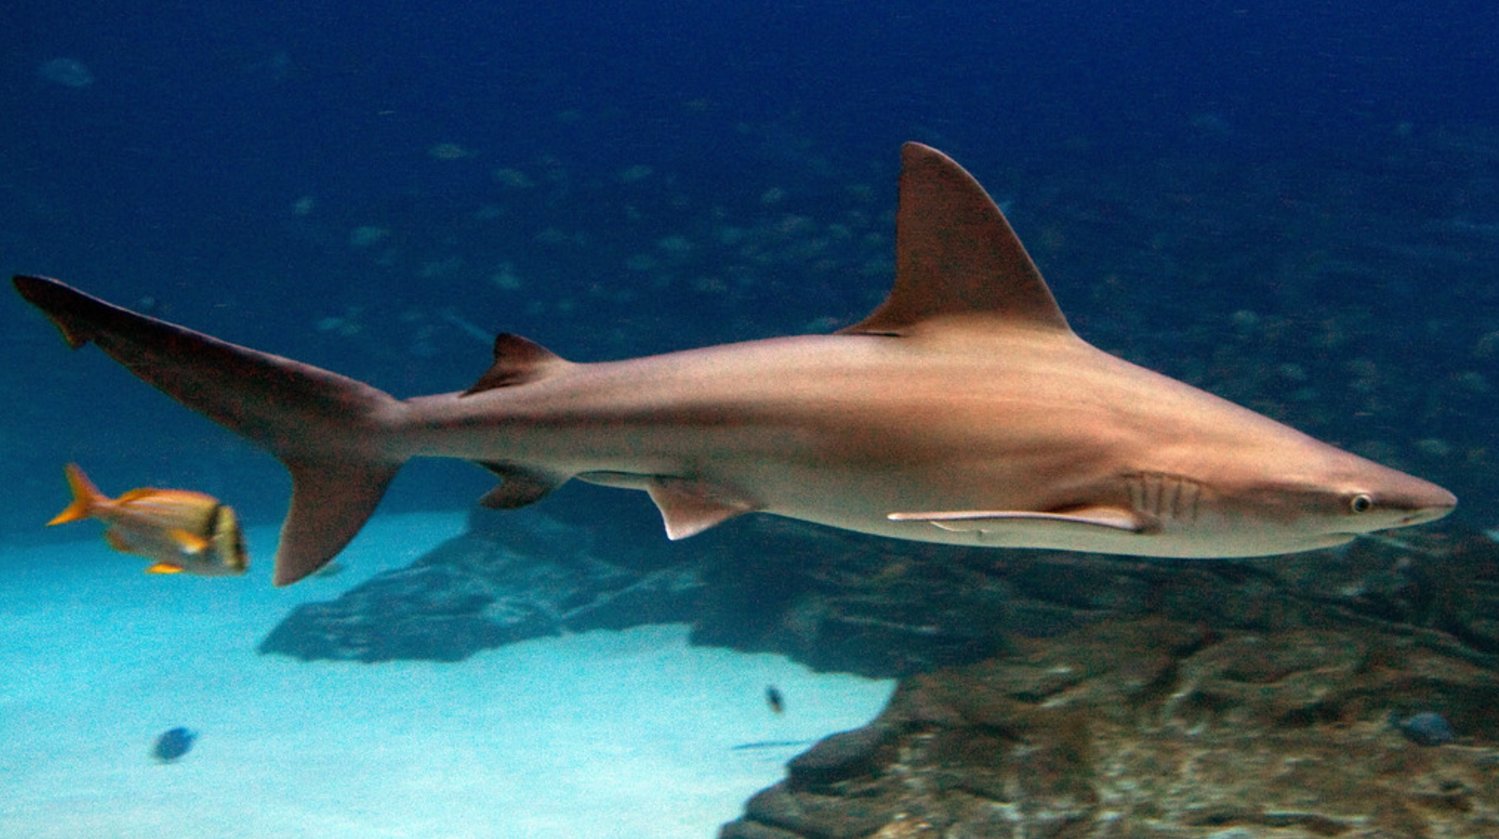 Sandbar sharks like this one are commonly found in Nantucket waters.